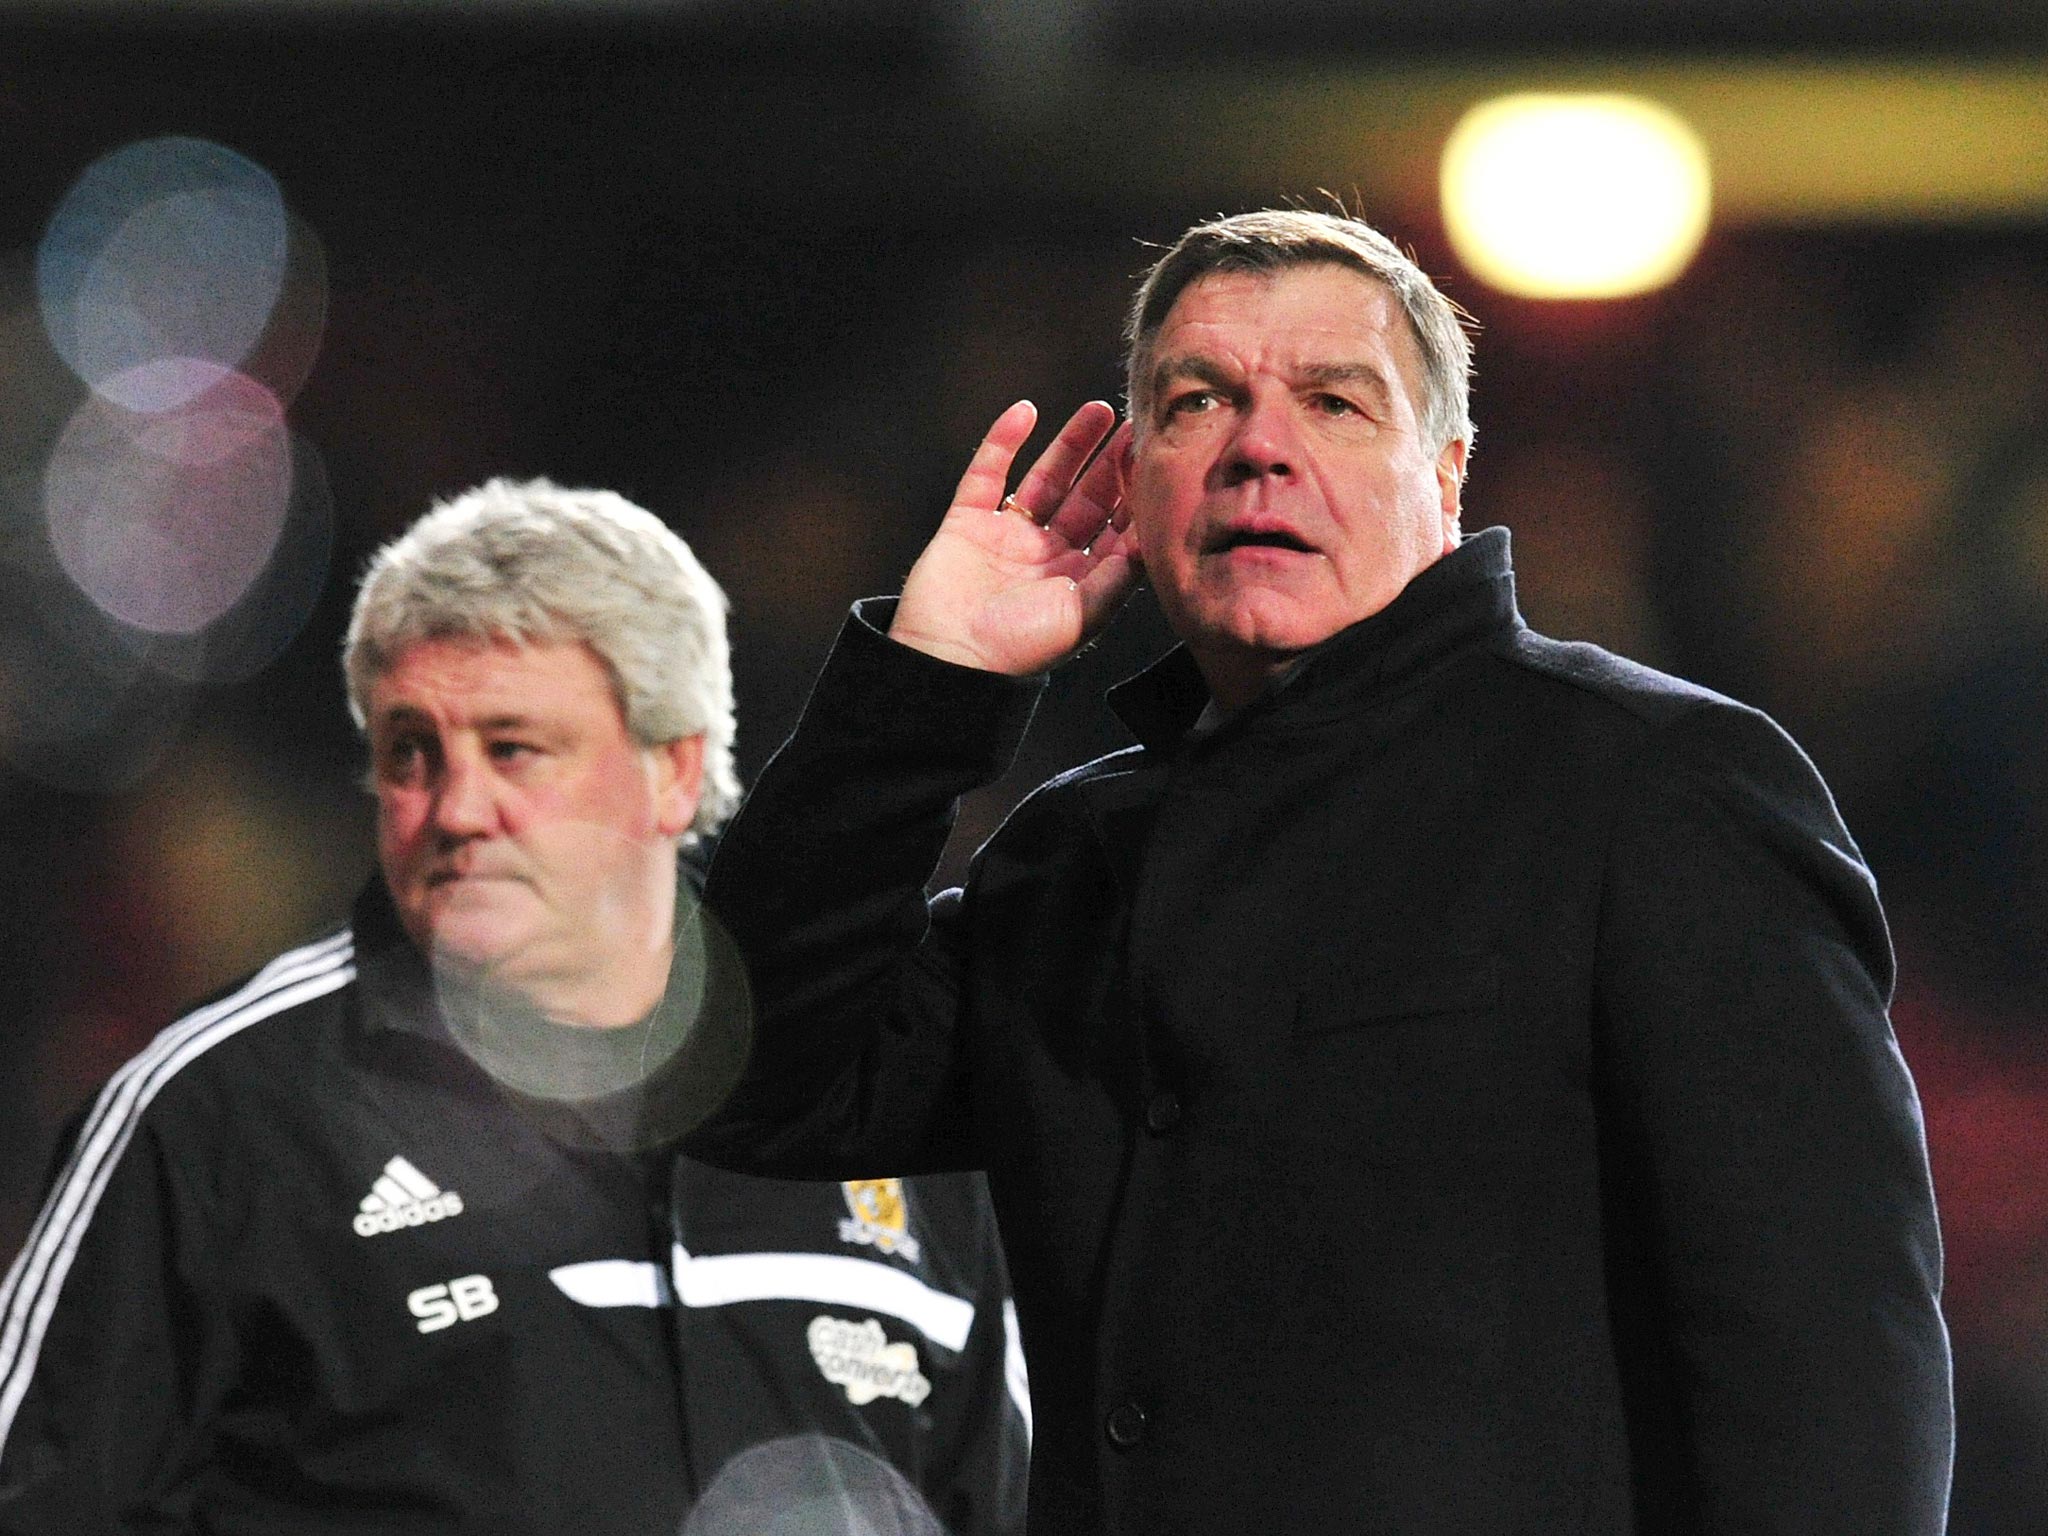 Allardyce responds to West ham fans booing at the final whistle